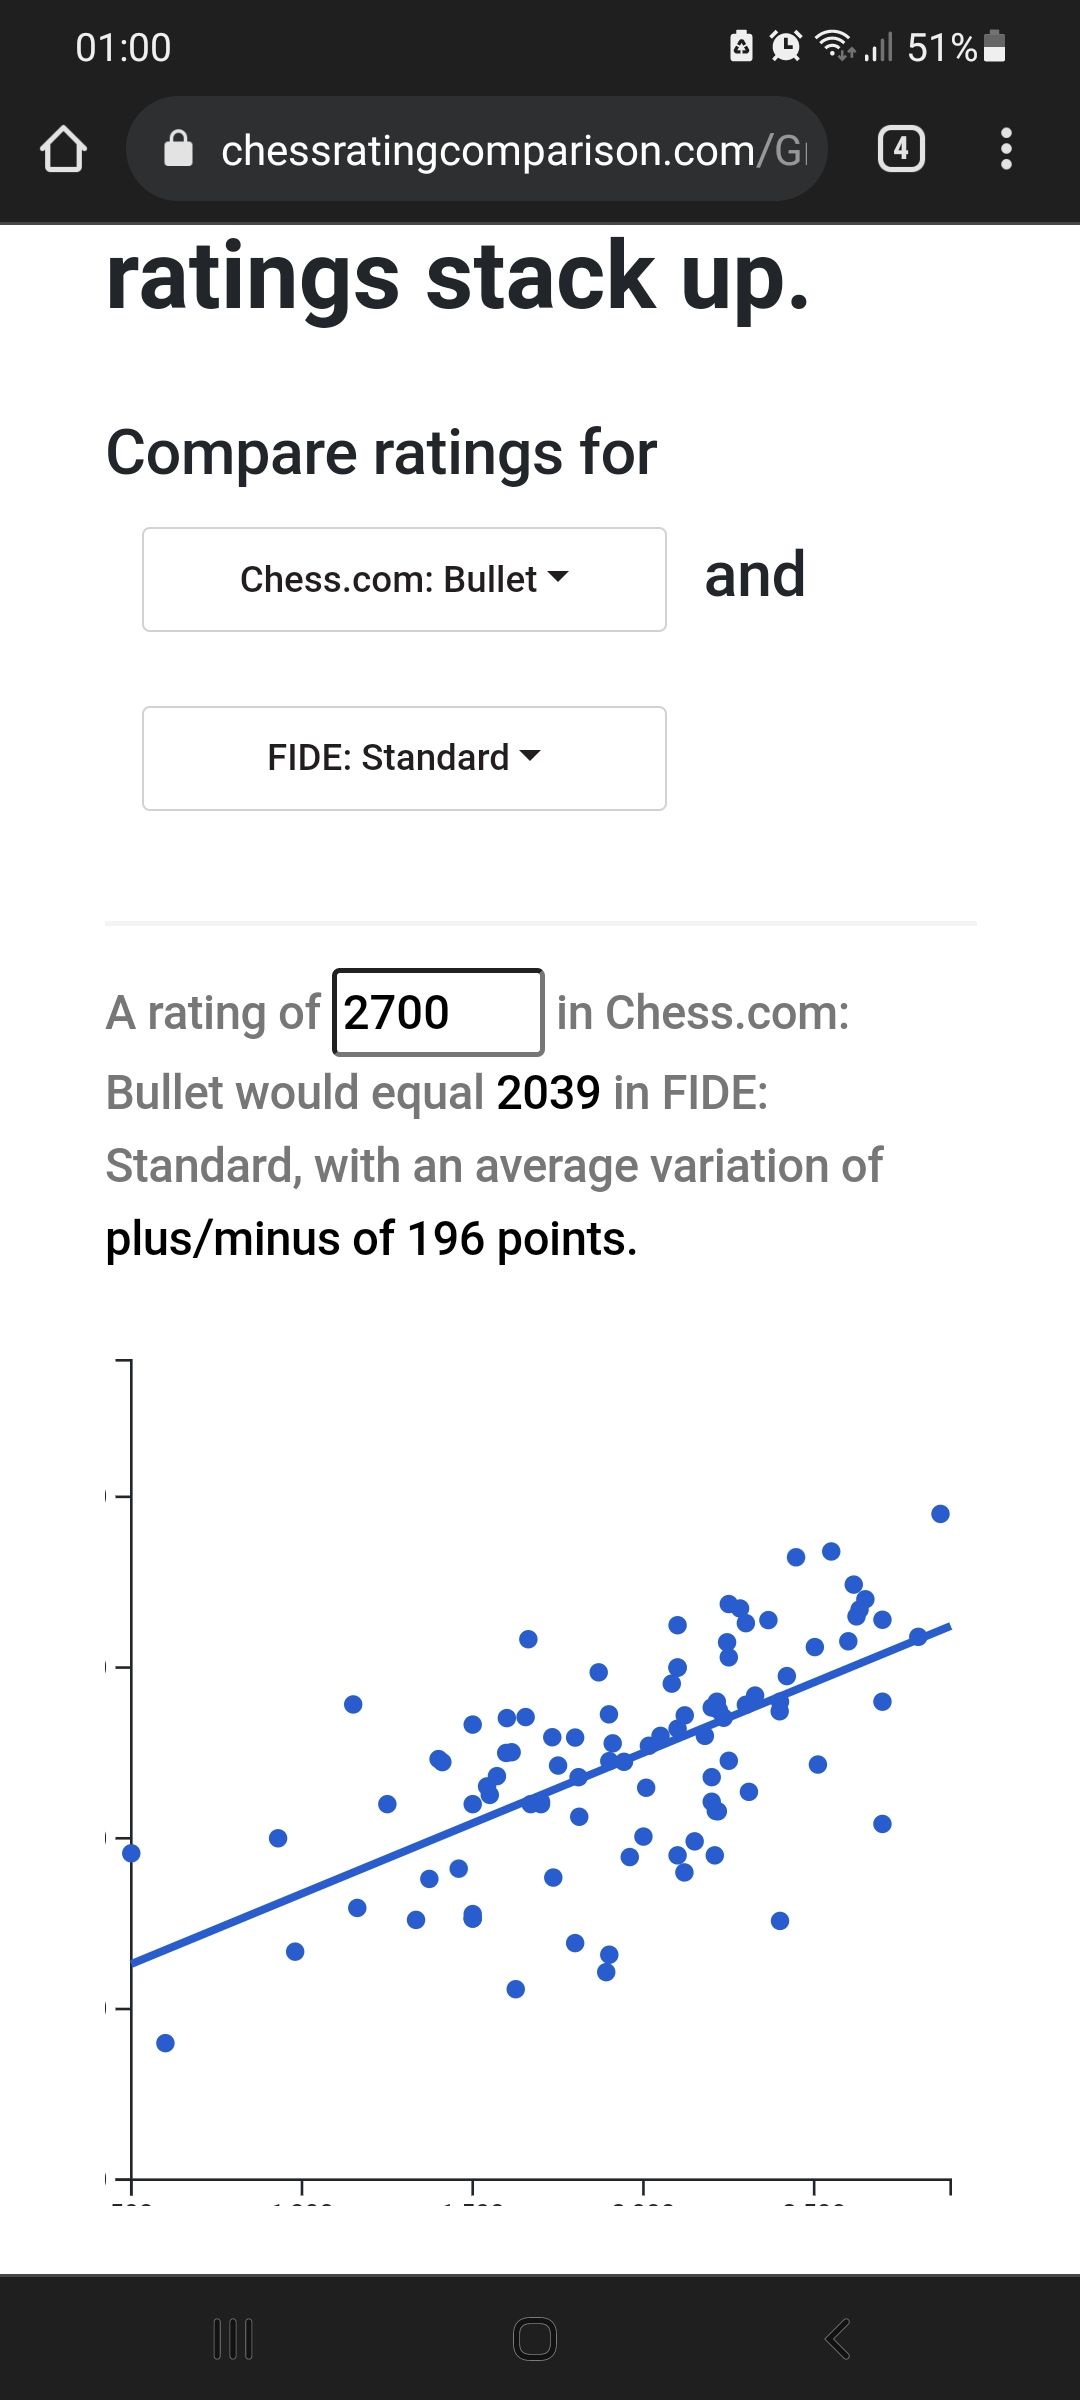 Are chess.com ratings accurate compared to FIDE? - Quora